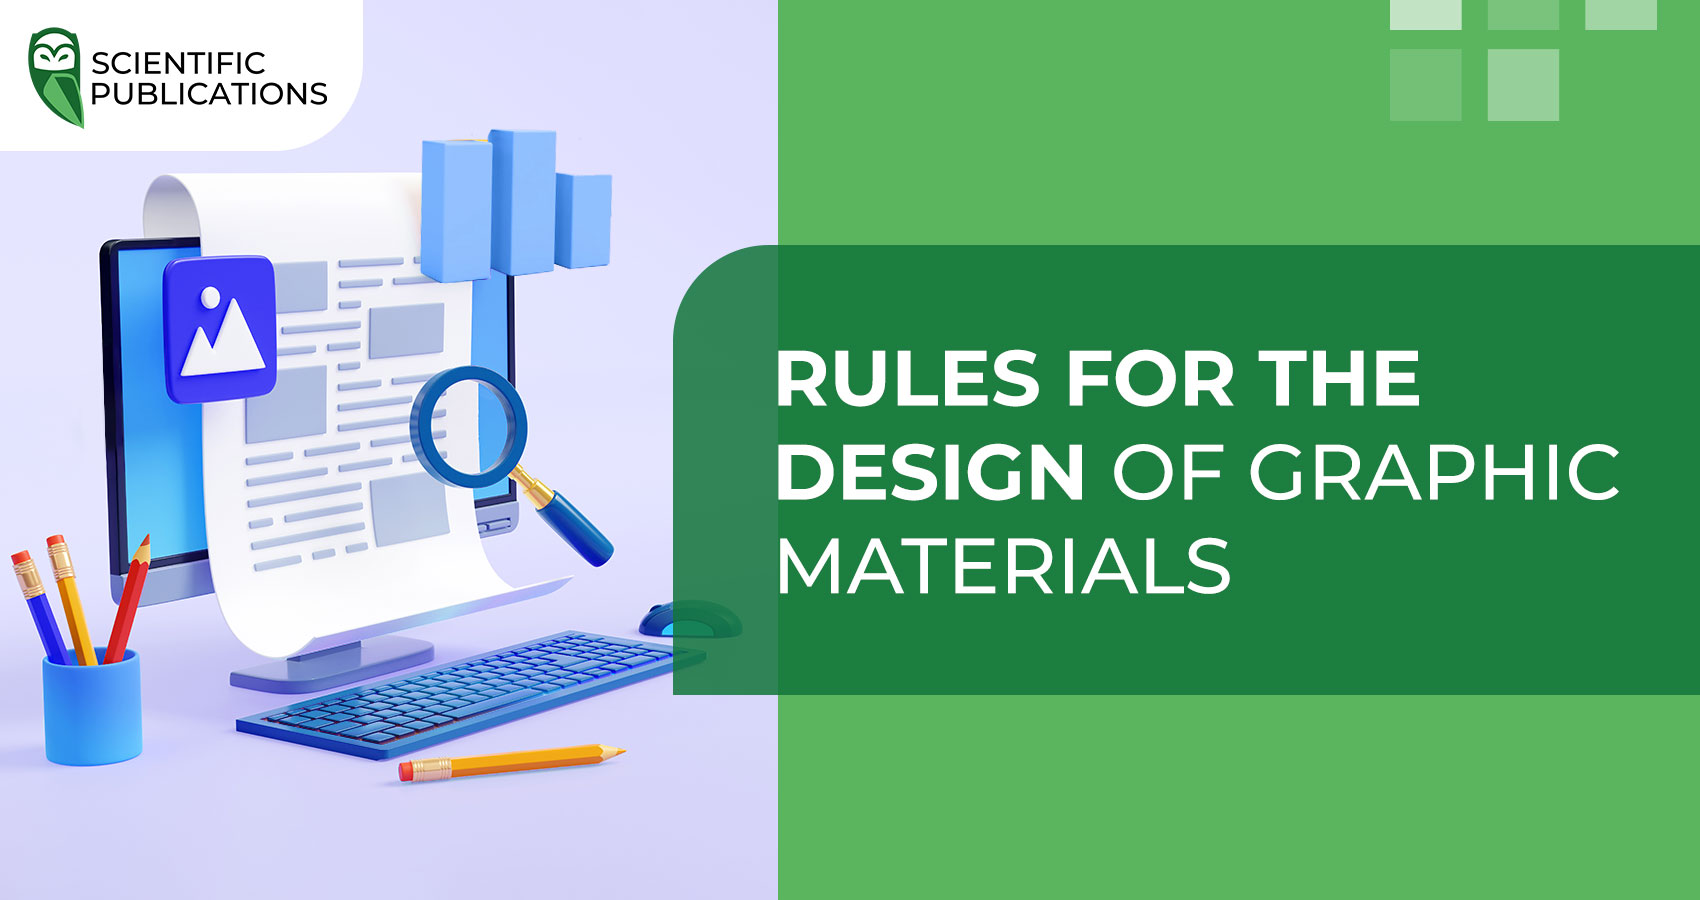 Rules of design of graphic materials